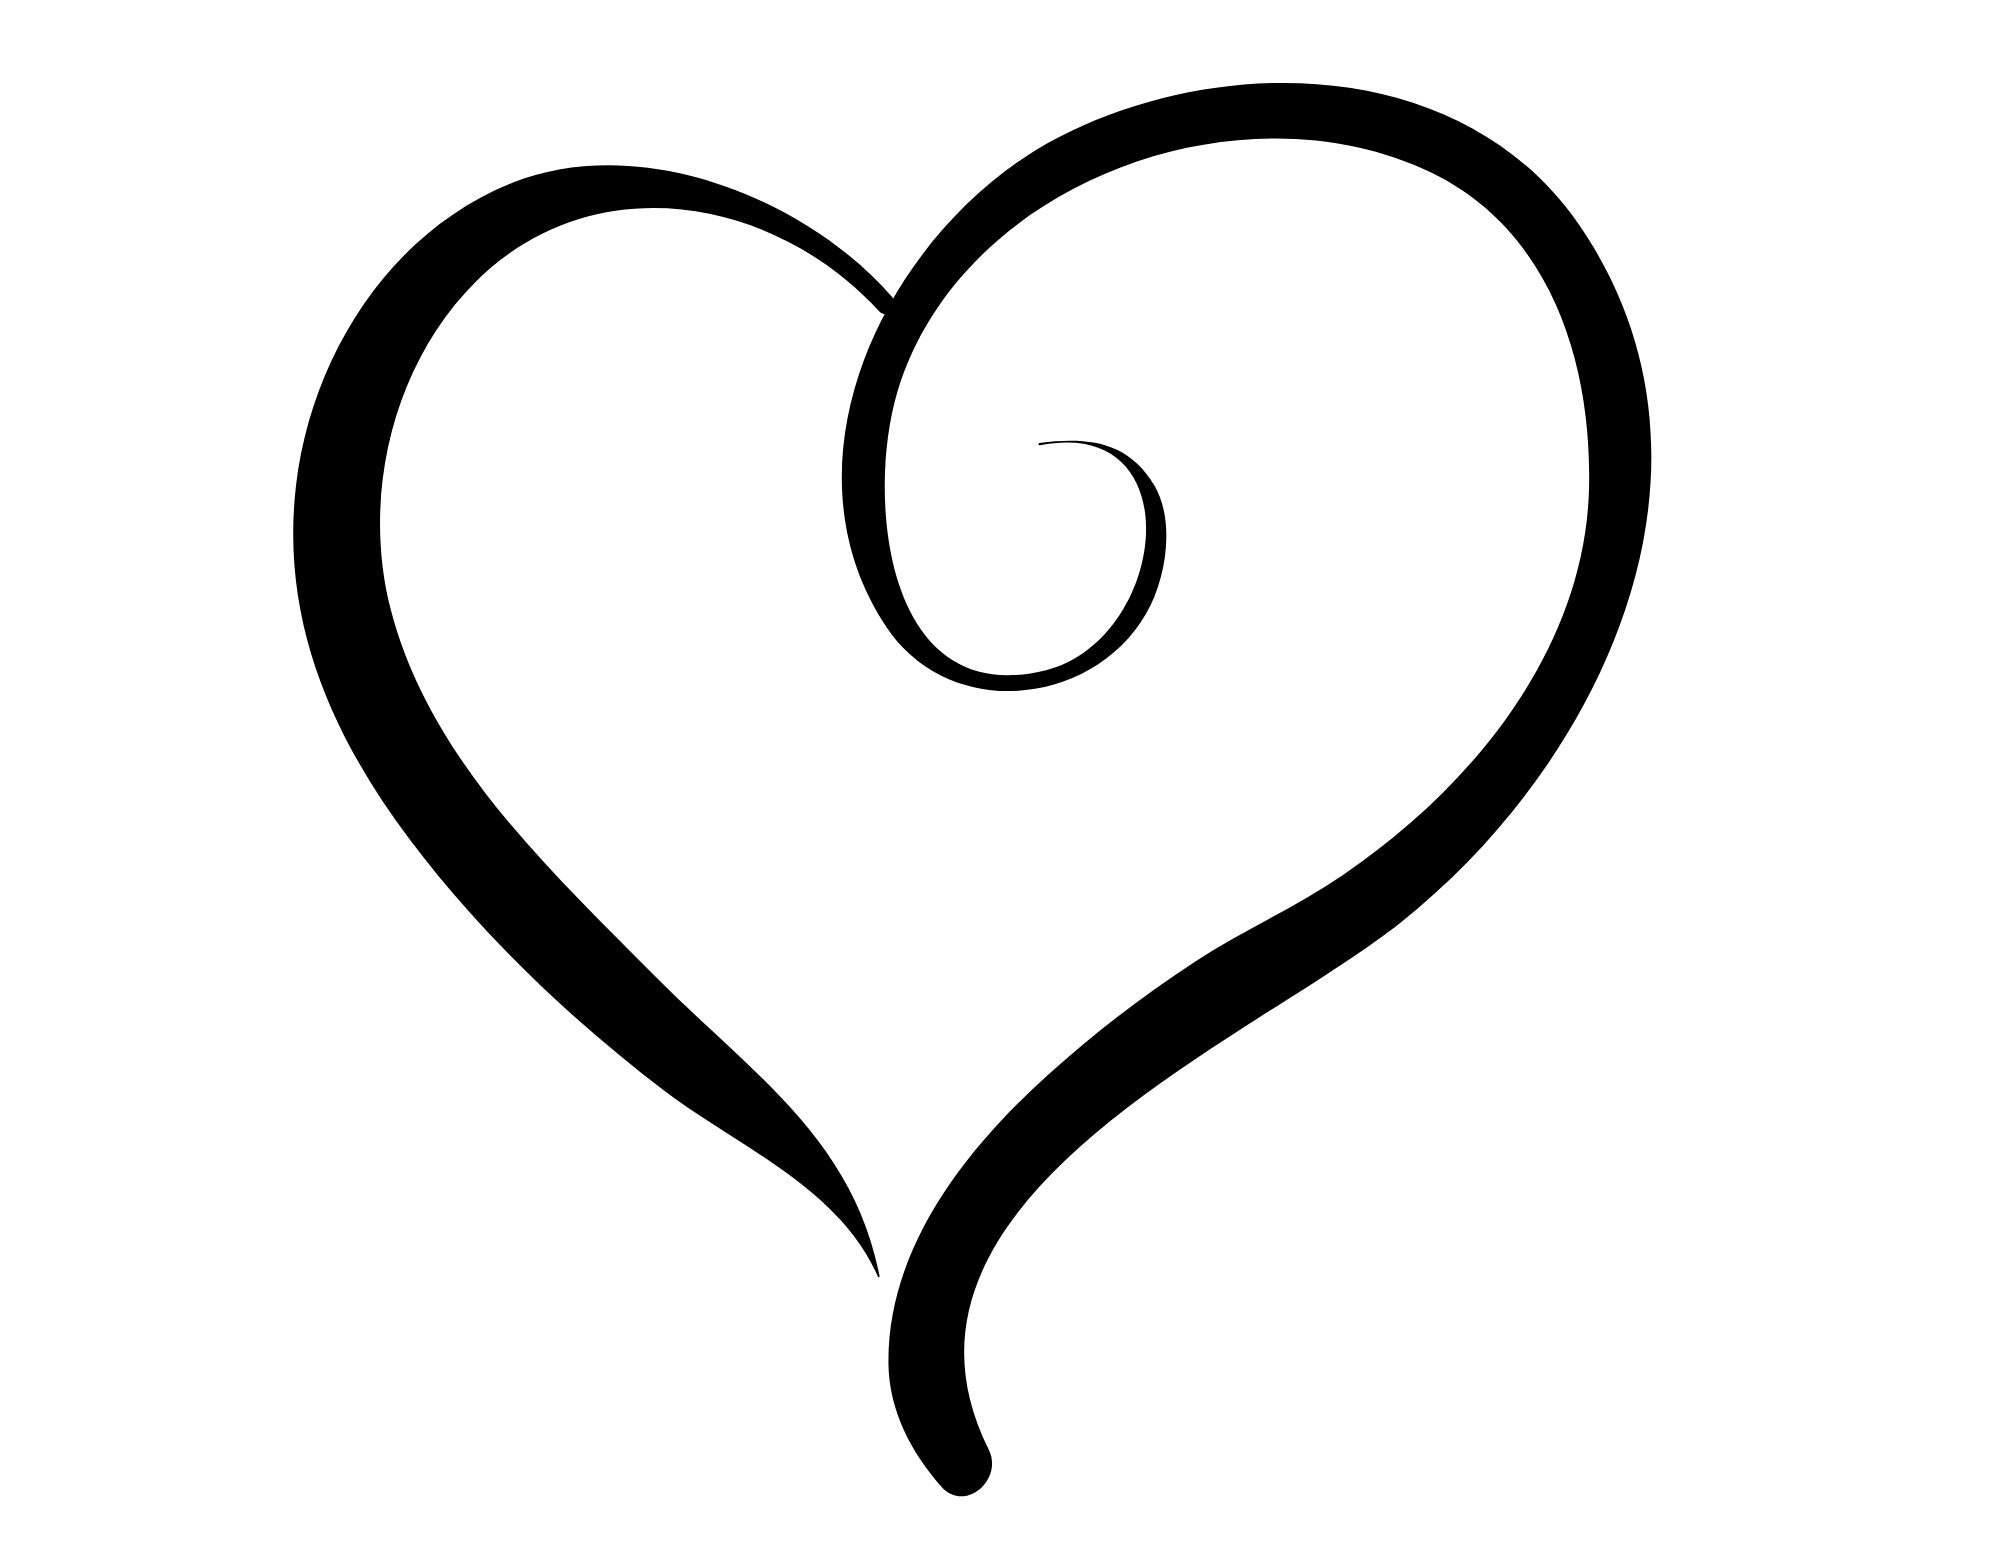 curly heart outline